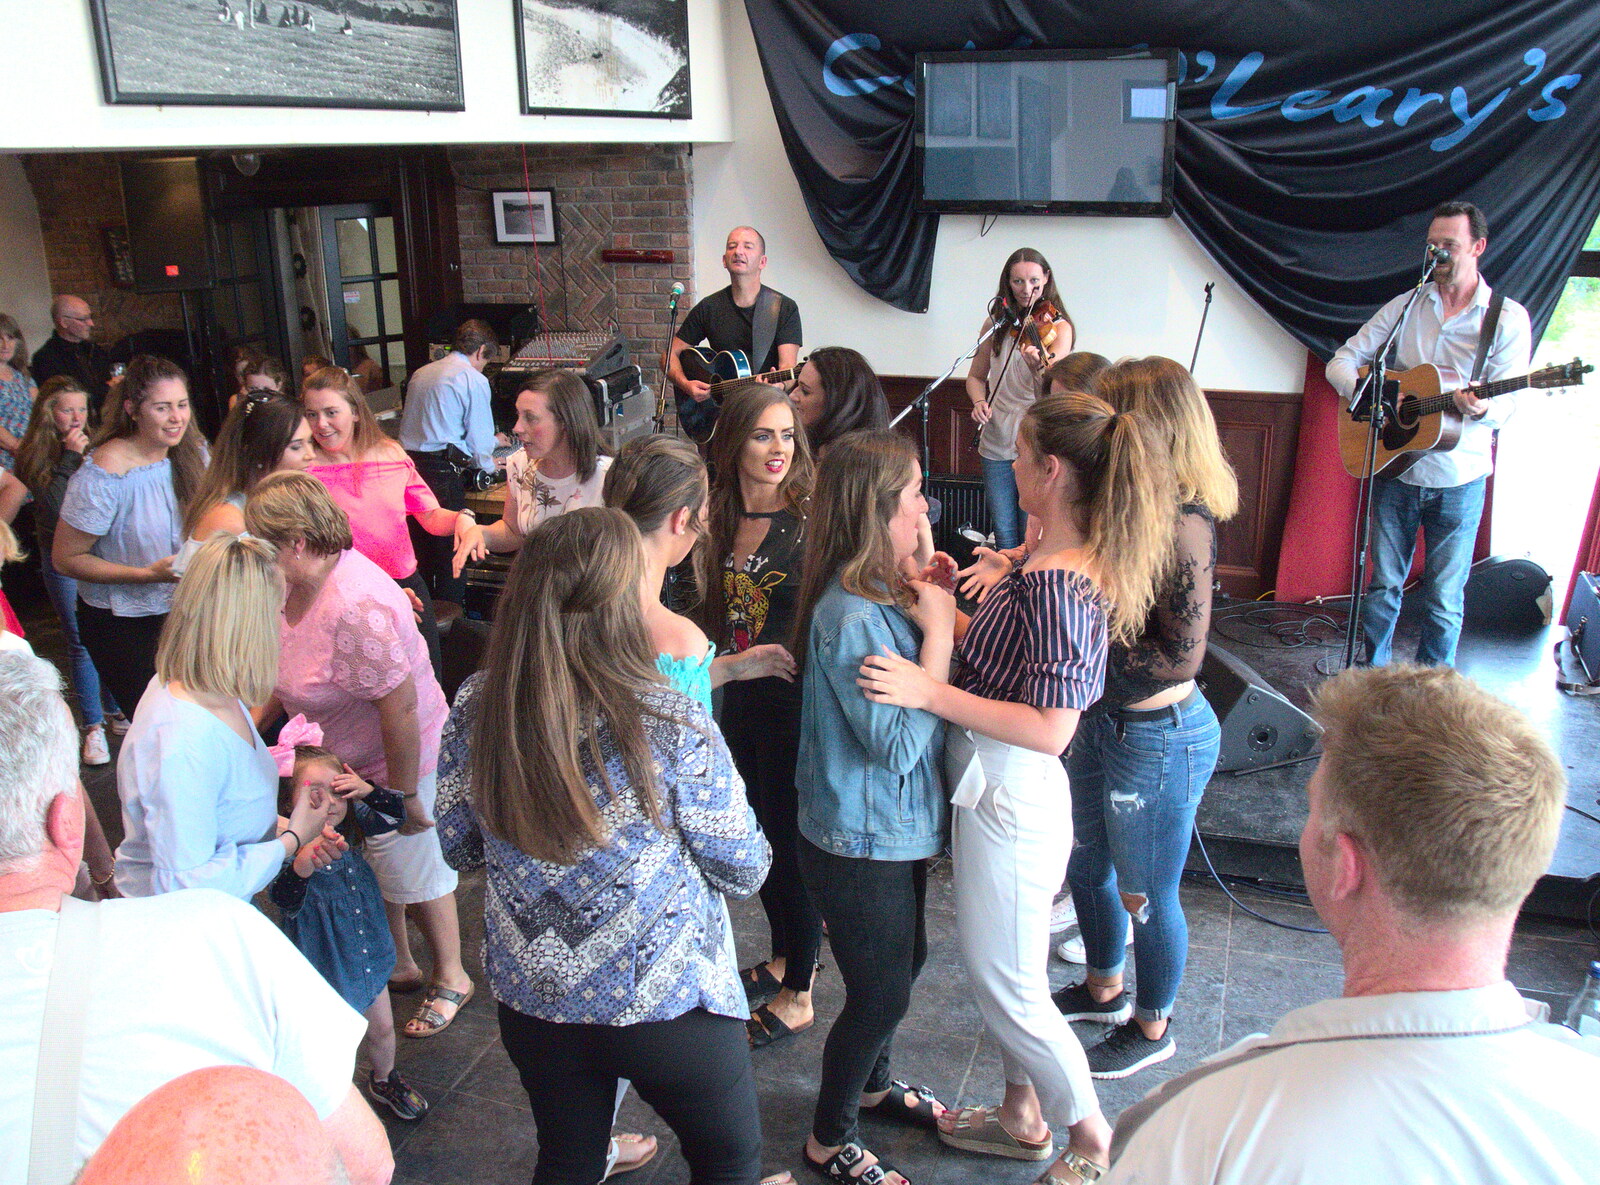 Dancing breaks out in Cable O'Leary's from Liverpool to Baile an Sceilg, County Kerry, Ireland - 30th July 2017